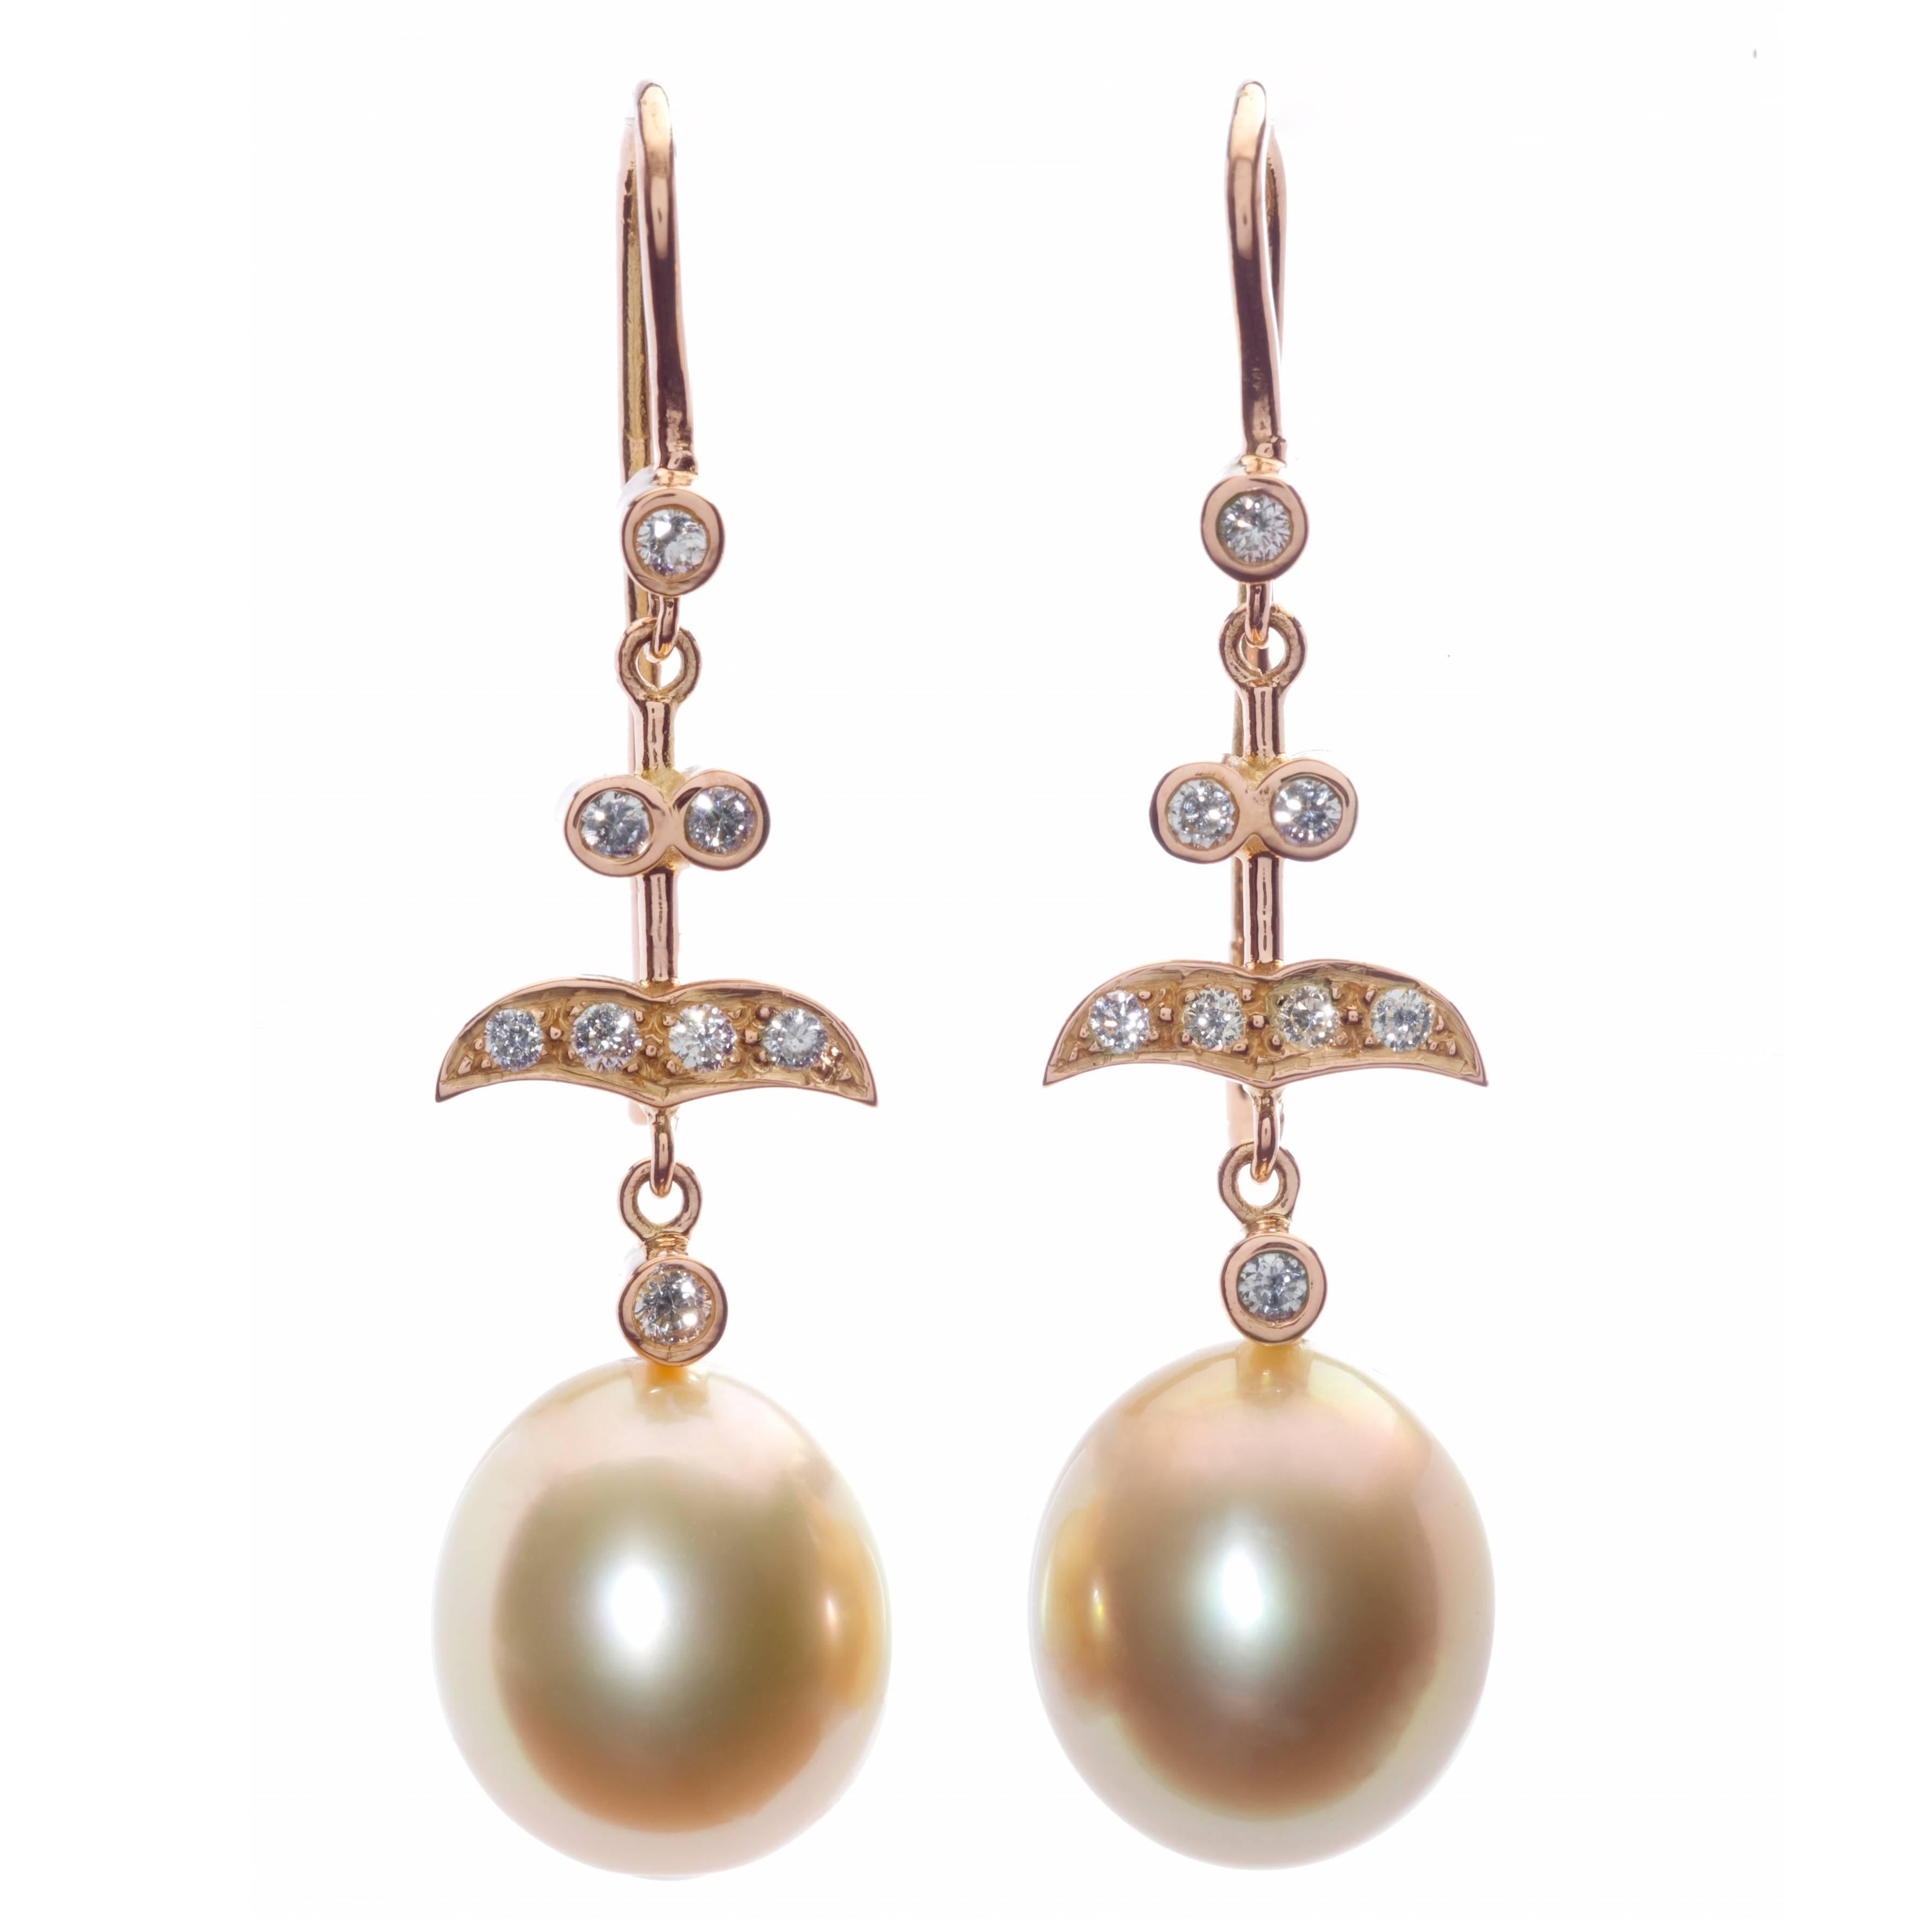 Contemporary Garnazelle Earings, "Olympia" For Sale